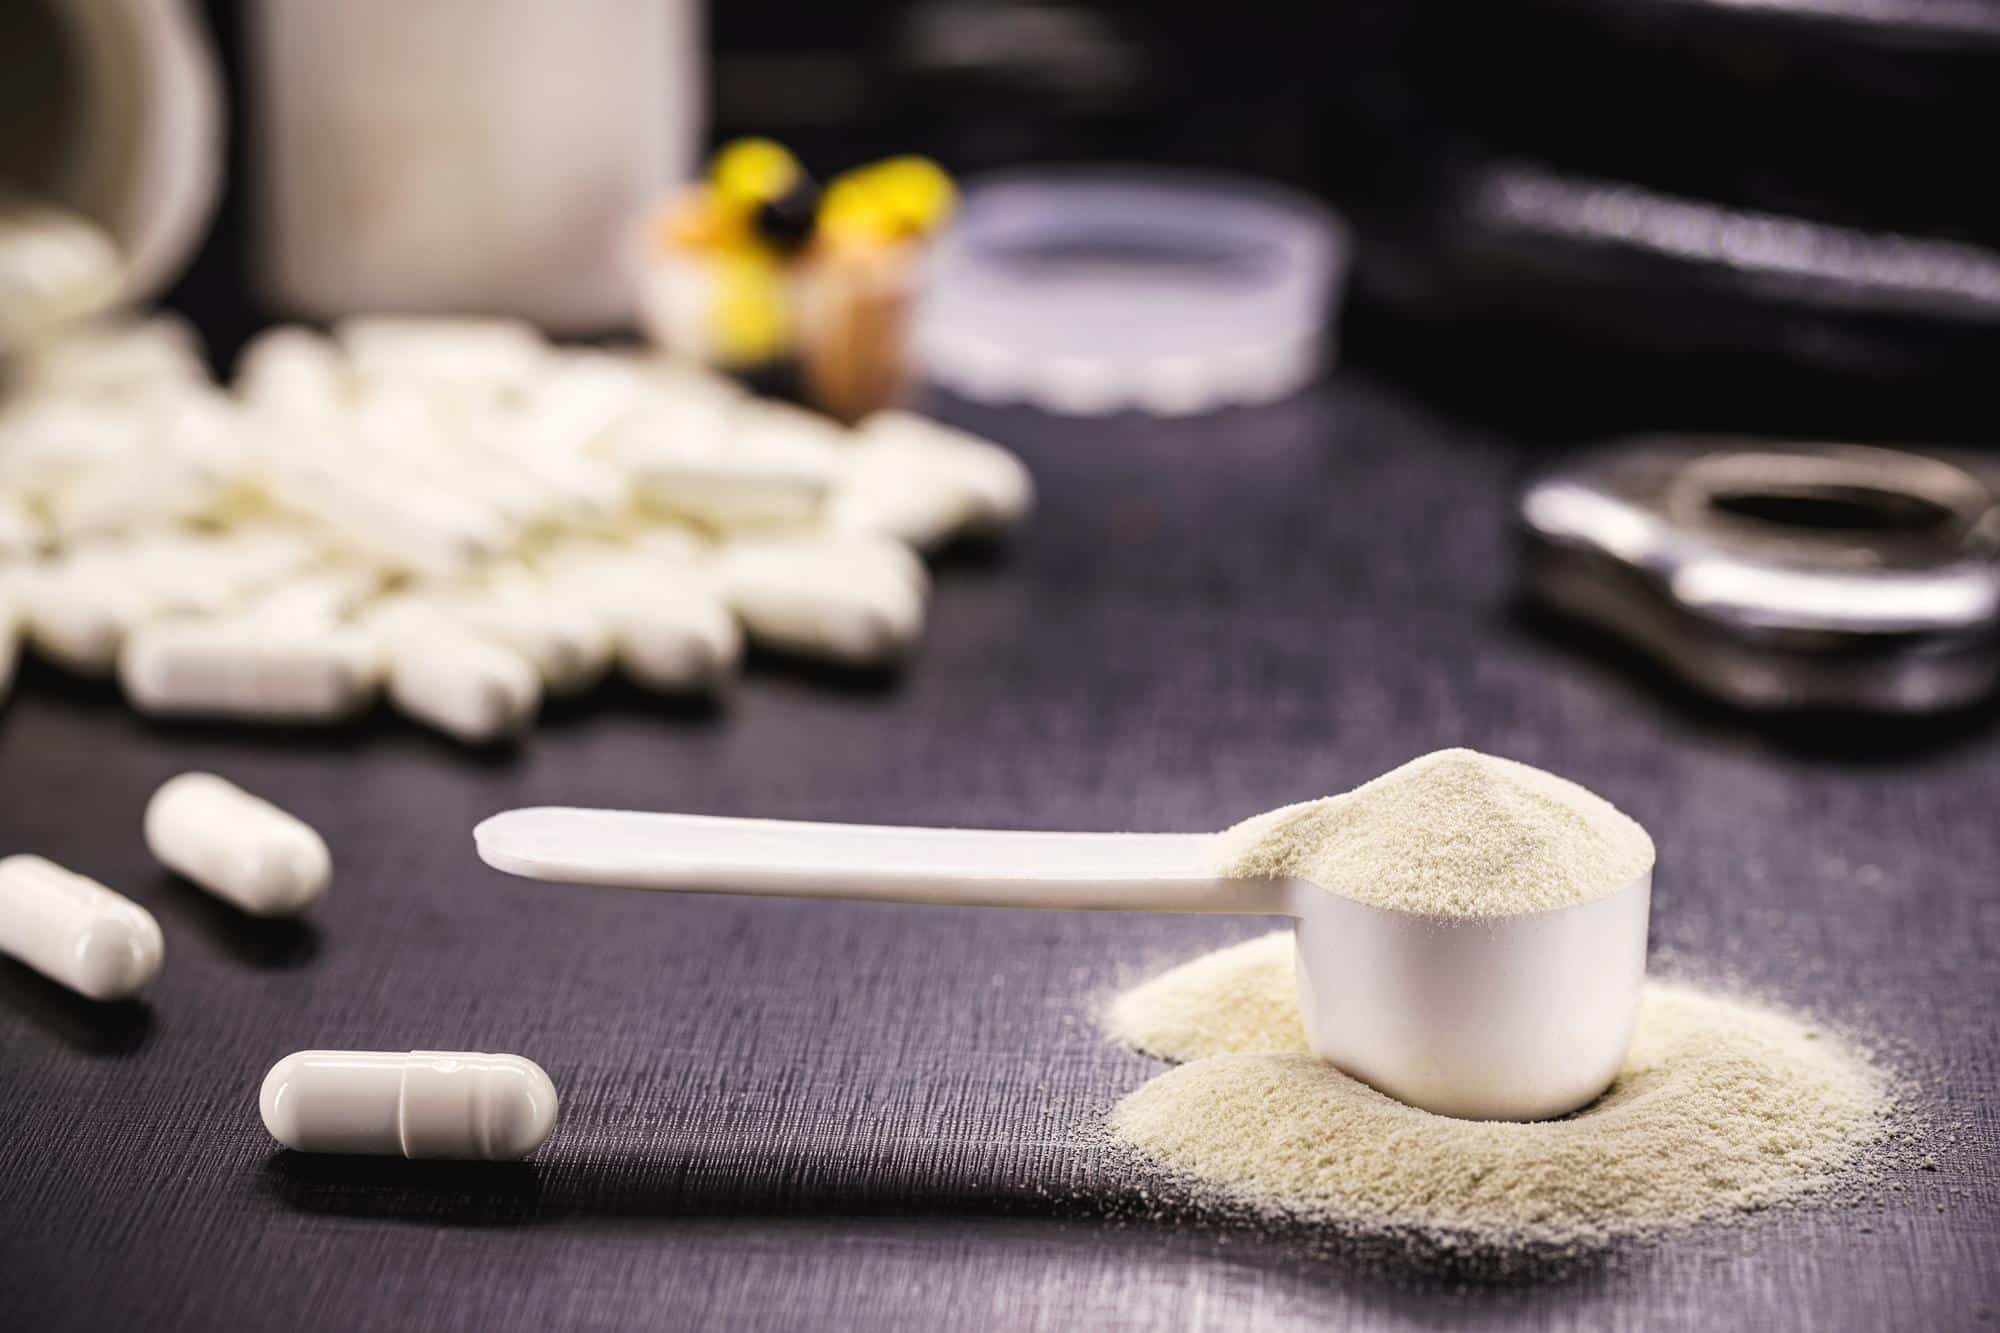 Knowing all about creatine